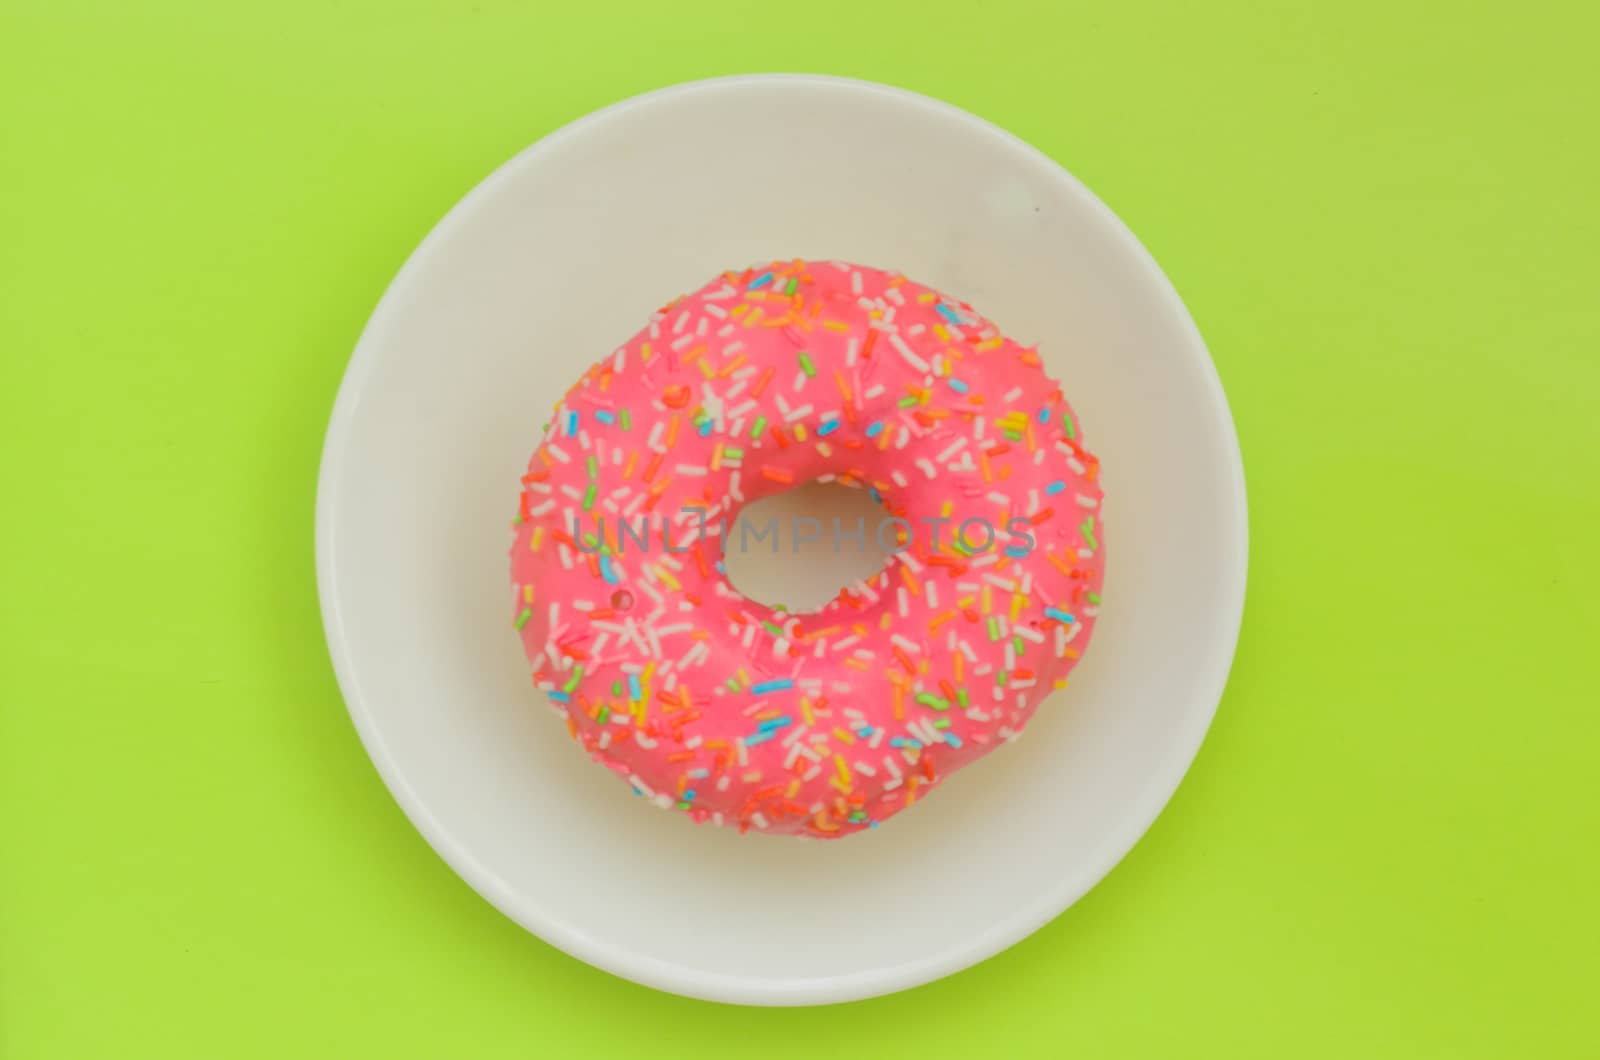 One pink glazed donut on white plate on green background. by andre_dechapelle